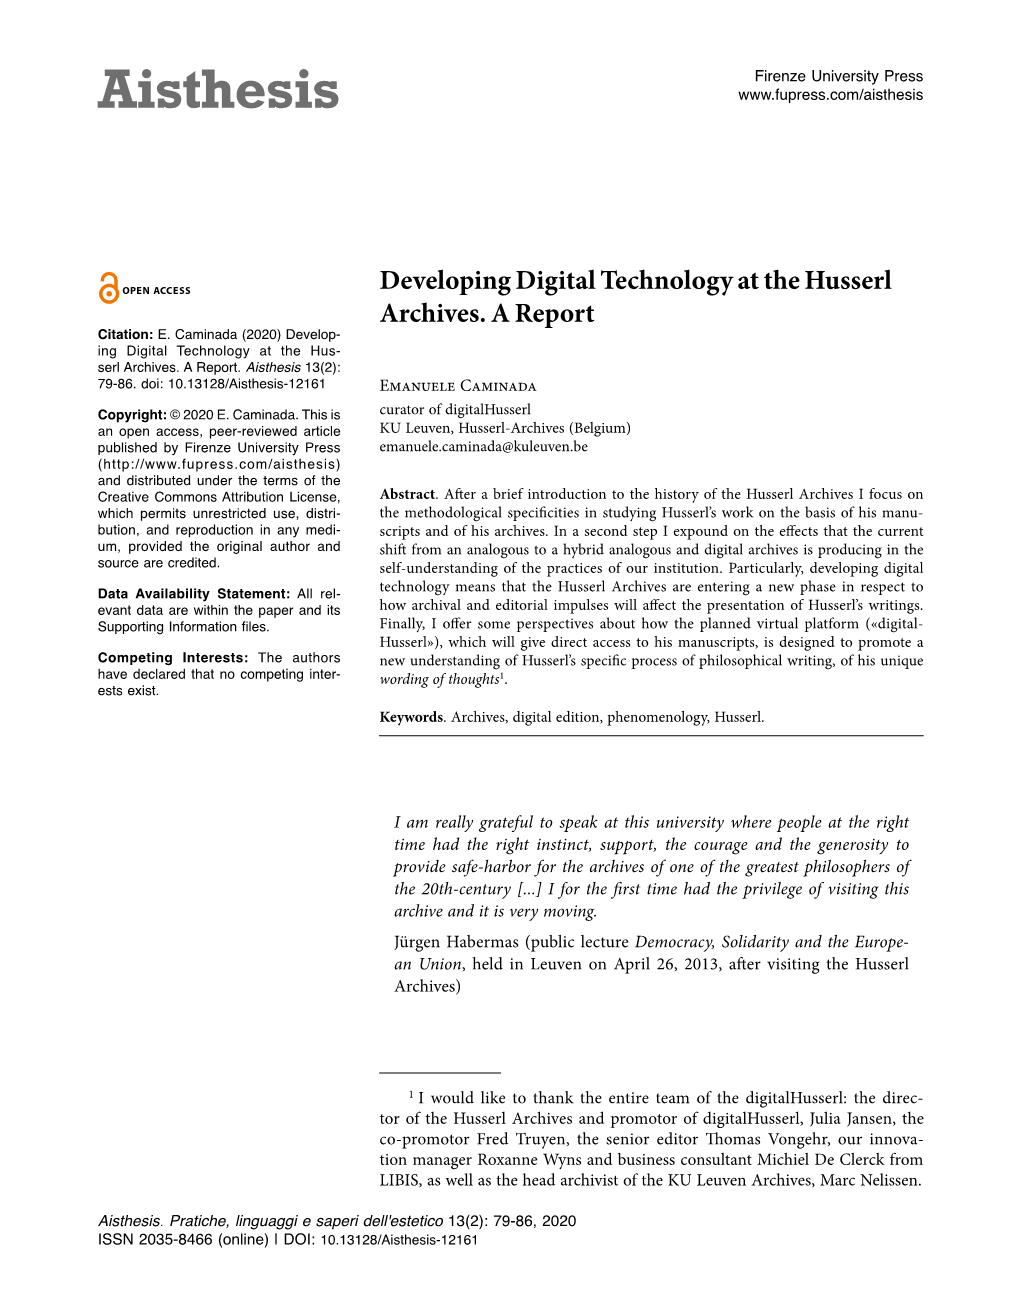 Developing Digital Technology at the Husserl Archives. a Report Citation: E